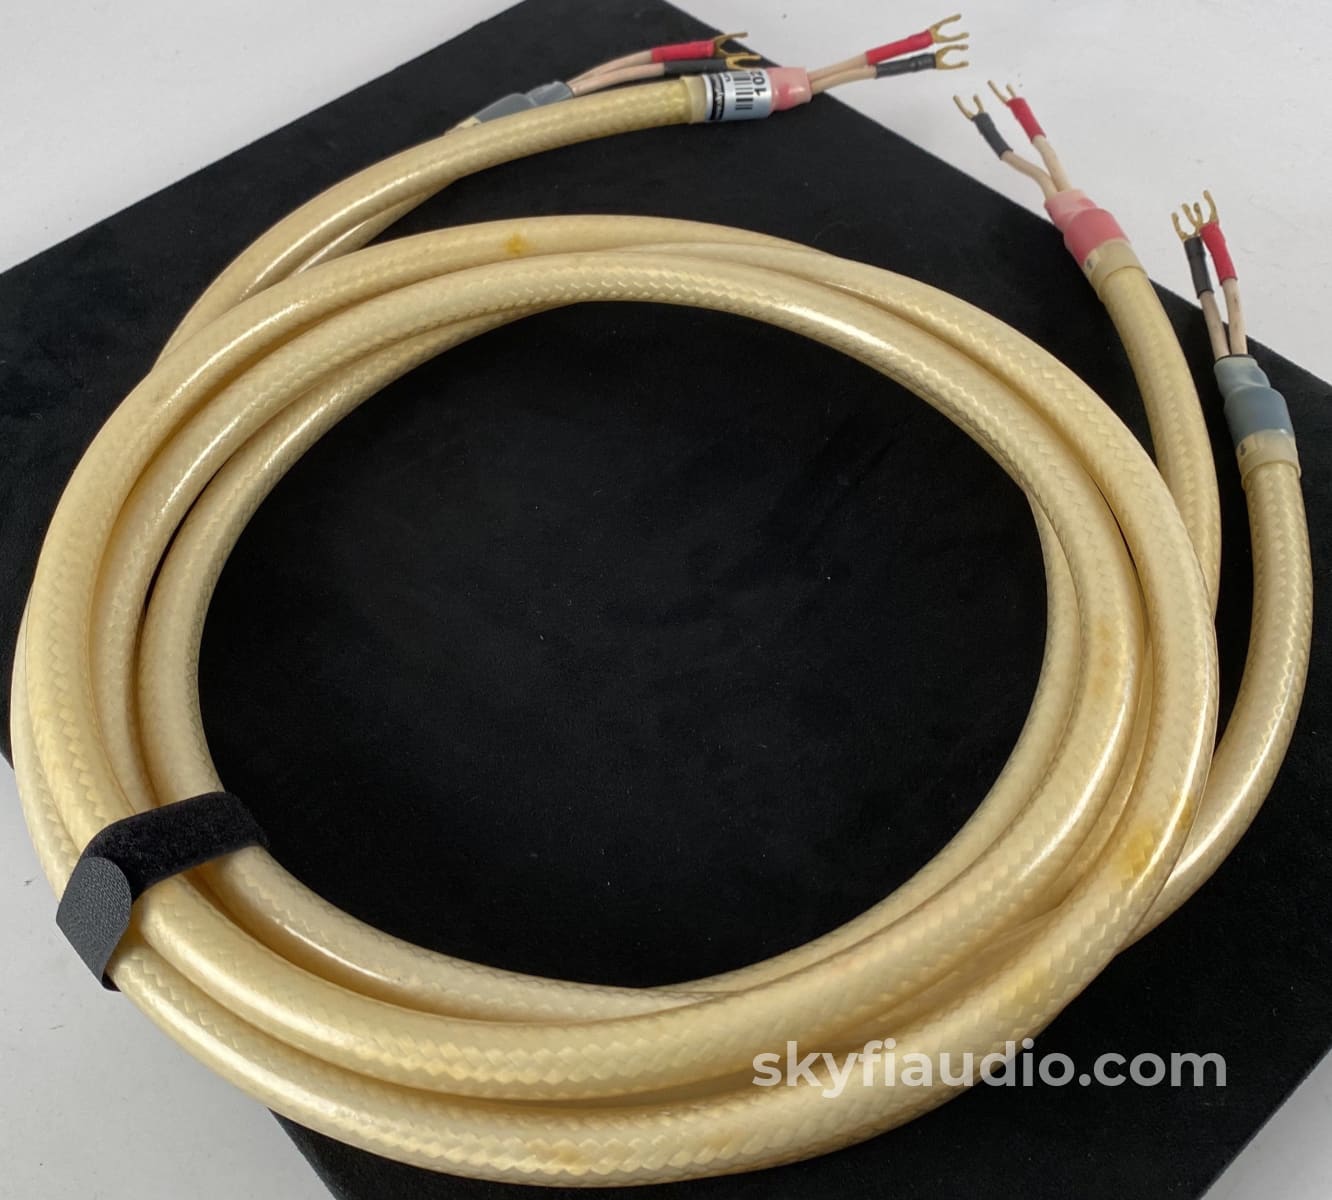 Straight Wire Maestro Vintage Speaker Cable 9 Pair Cables